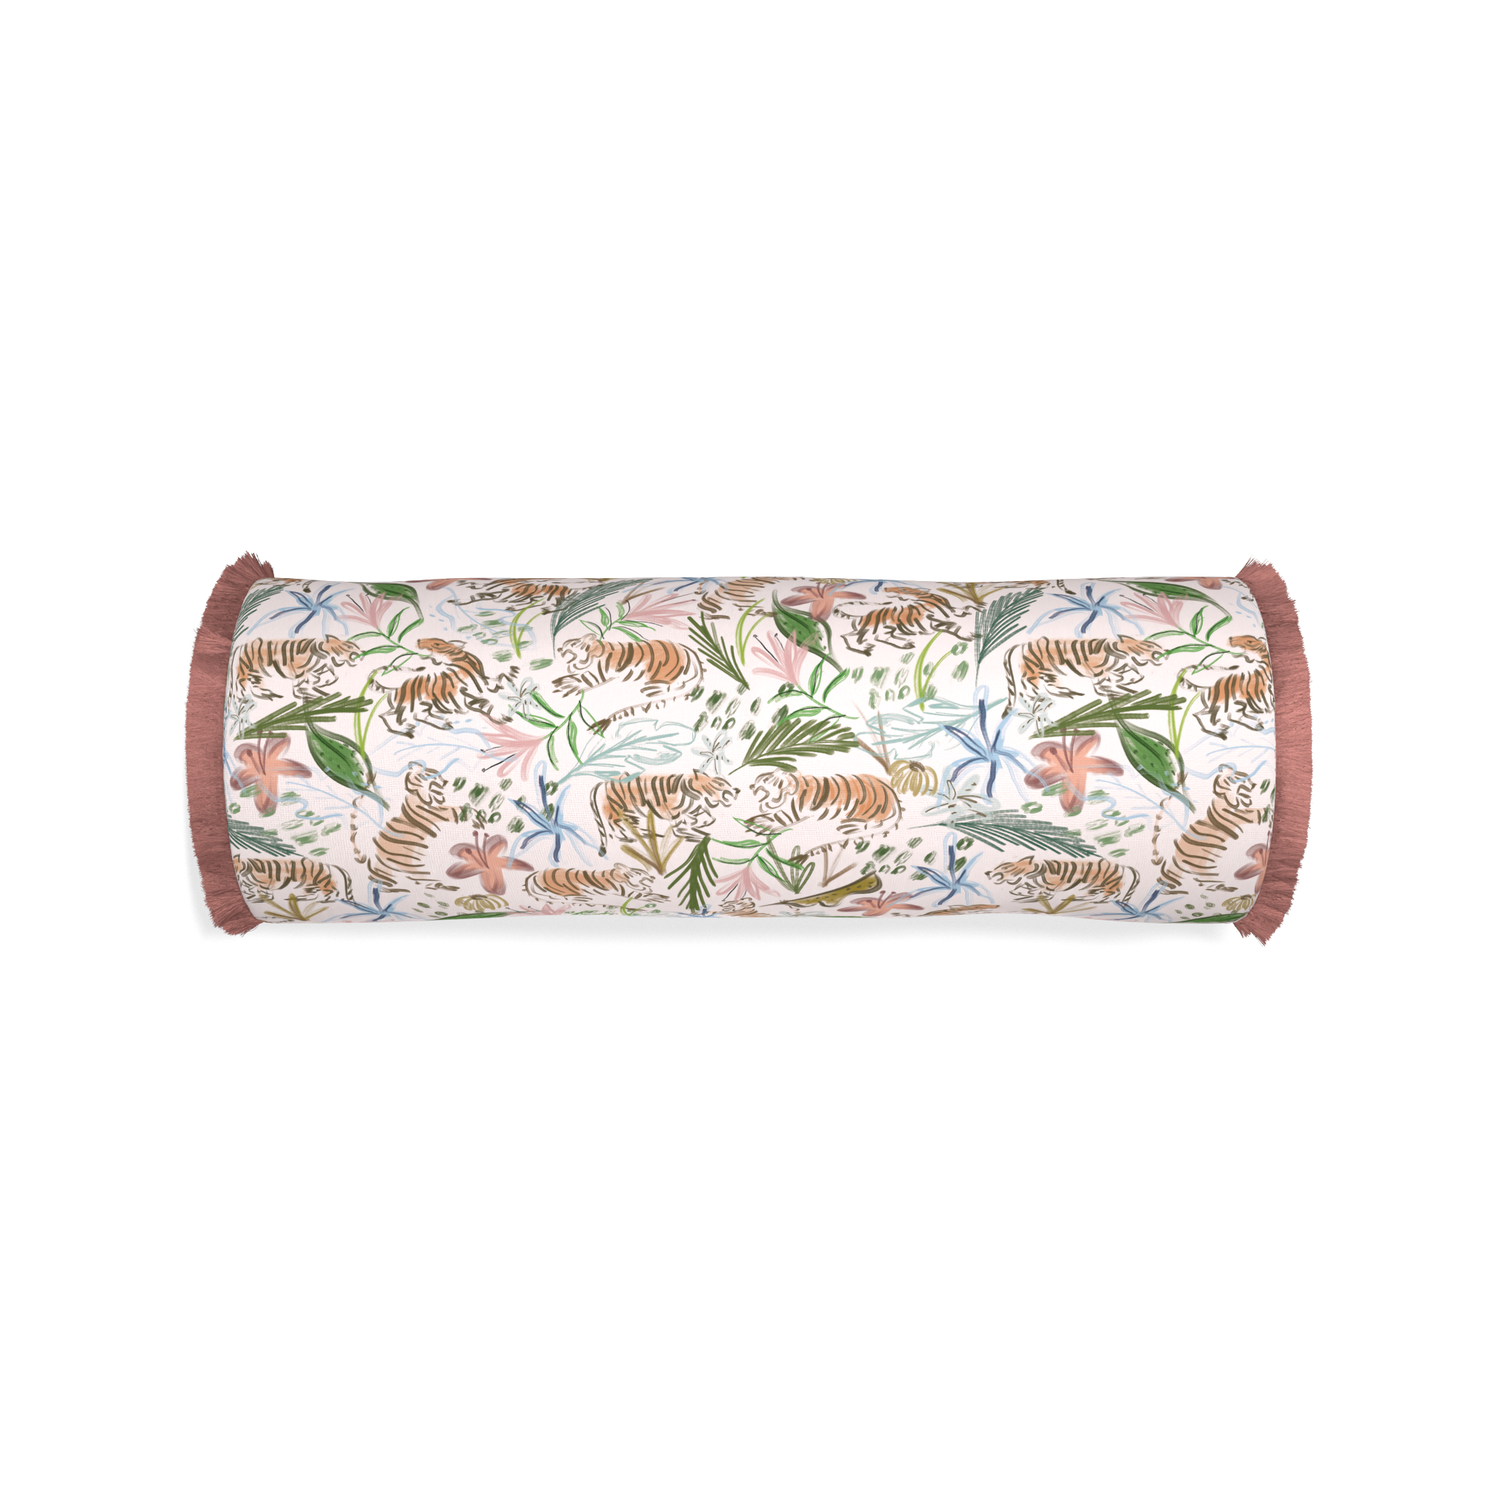 Bolster frida pink custom pink chinoiserie tigerpillow with d fringe on white background